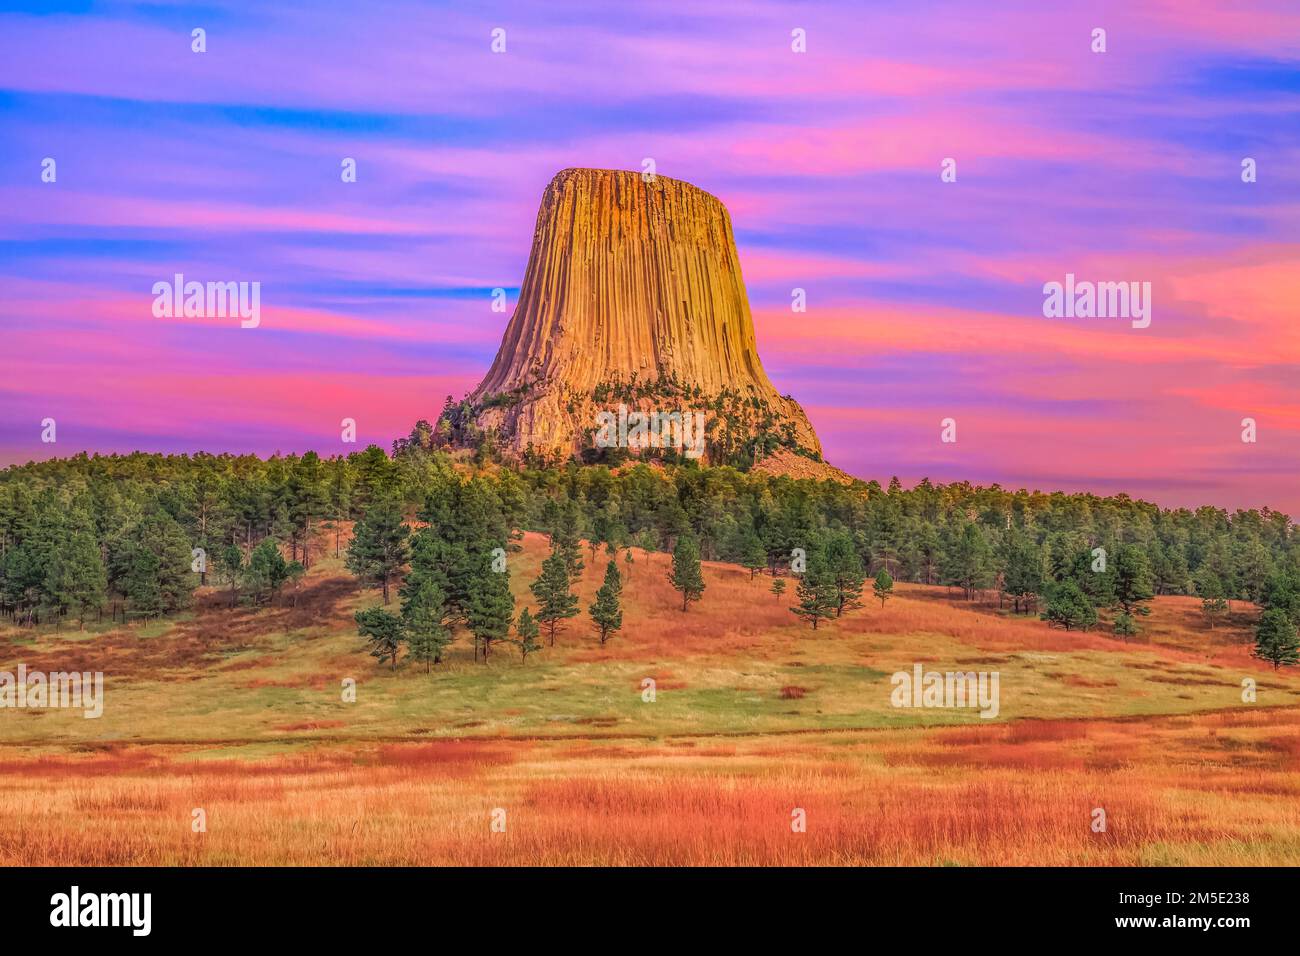 Sunset over Devils Tower presso devils tower National Monument vicino a hulett, wyoming Foto Stock